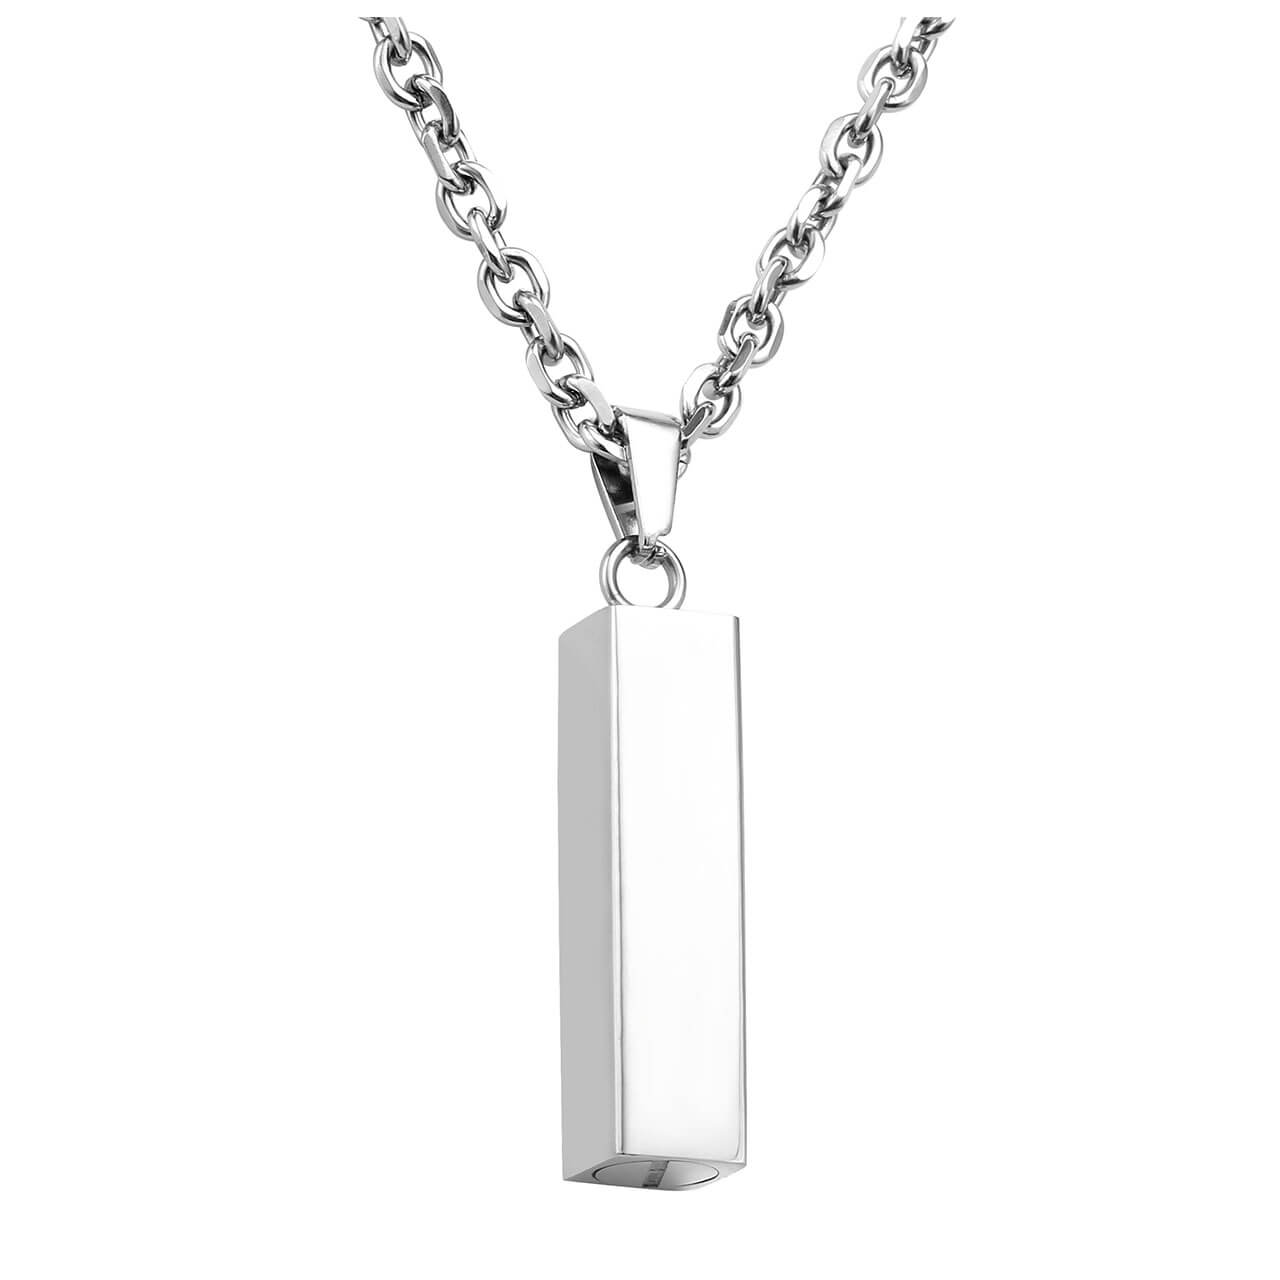 Jovivi cremation jewelry for ashes urns necklace bar pendant